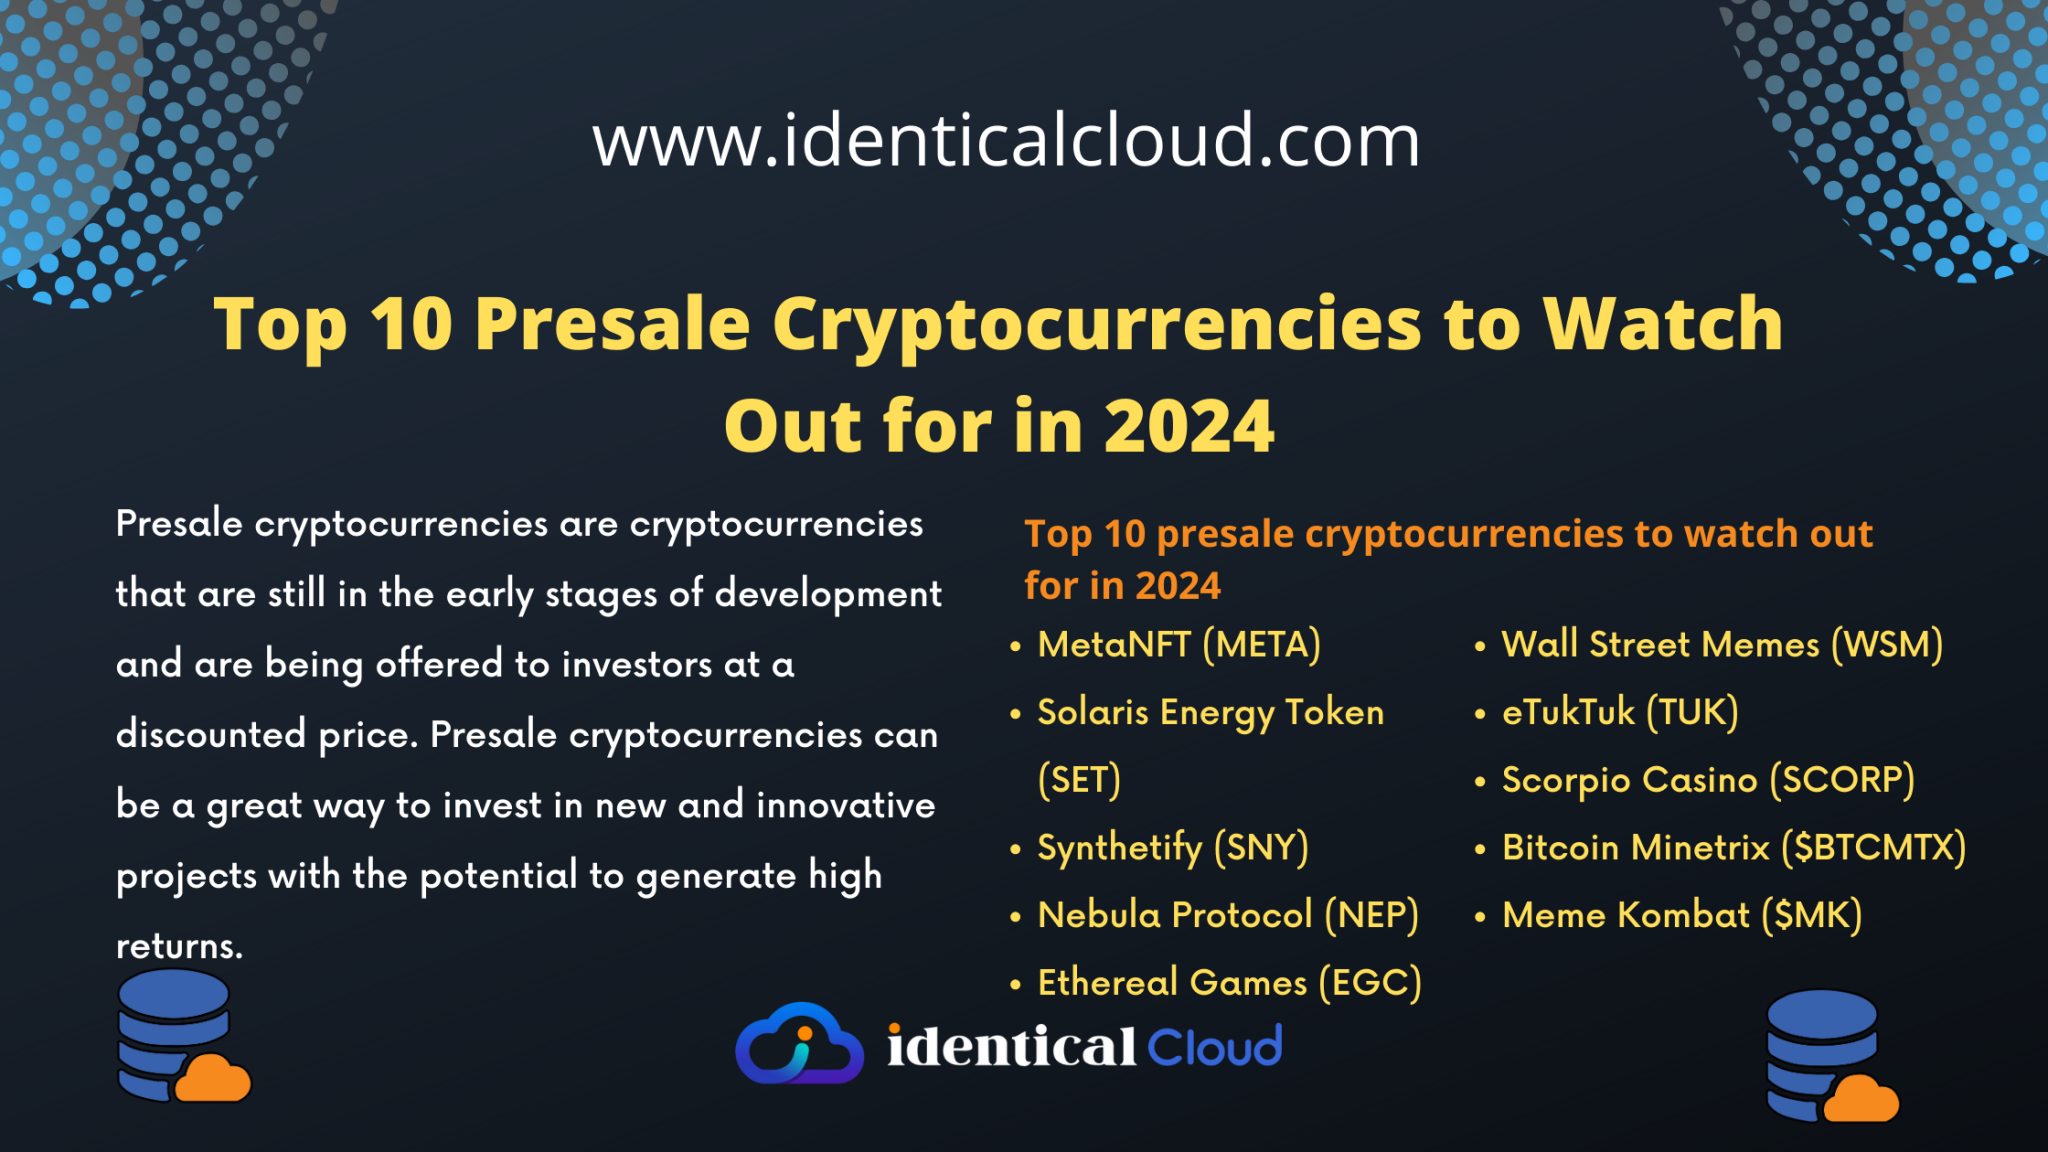 Top 10 Presale Cryptocurrencies to Watch Out for in 2024 identical Cloud